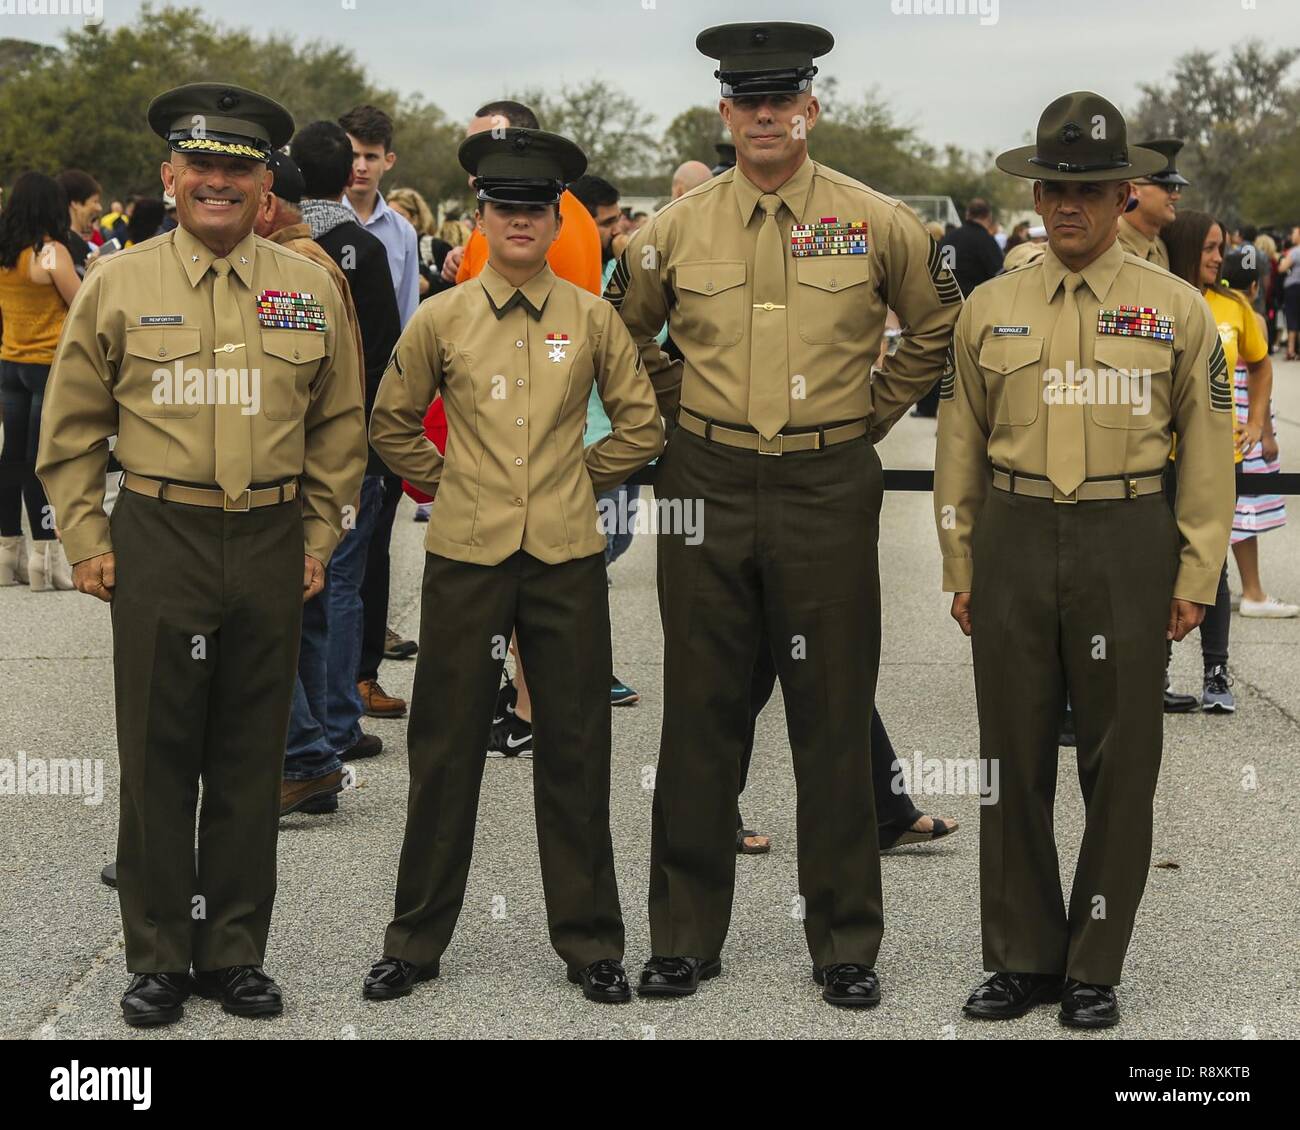 (From left to right) U.S. Marine Corps Brig. Gen. Austin Renforth, commanding general of Marine Corps Recruit Depot Parris Island/Eastern Recruiting Region, Pfc. Madeline Kreamer, Sgt. Maj. Howard Kreamer, the sergeant major of 2nd Marine Aircraft Wing, and Sgt. Maj. Rafael Rodriguez, Marine Corps Recruit Depot Parris Island/Eastern Recruiting Region Sergeant Major, pose for a photo after a graduation ceremony on Marine Corps Recruit Depot, Parris Island, S.C., March 10, 2017. The ceremony is conducted to honor the new Marines. Stock Photo